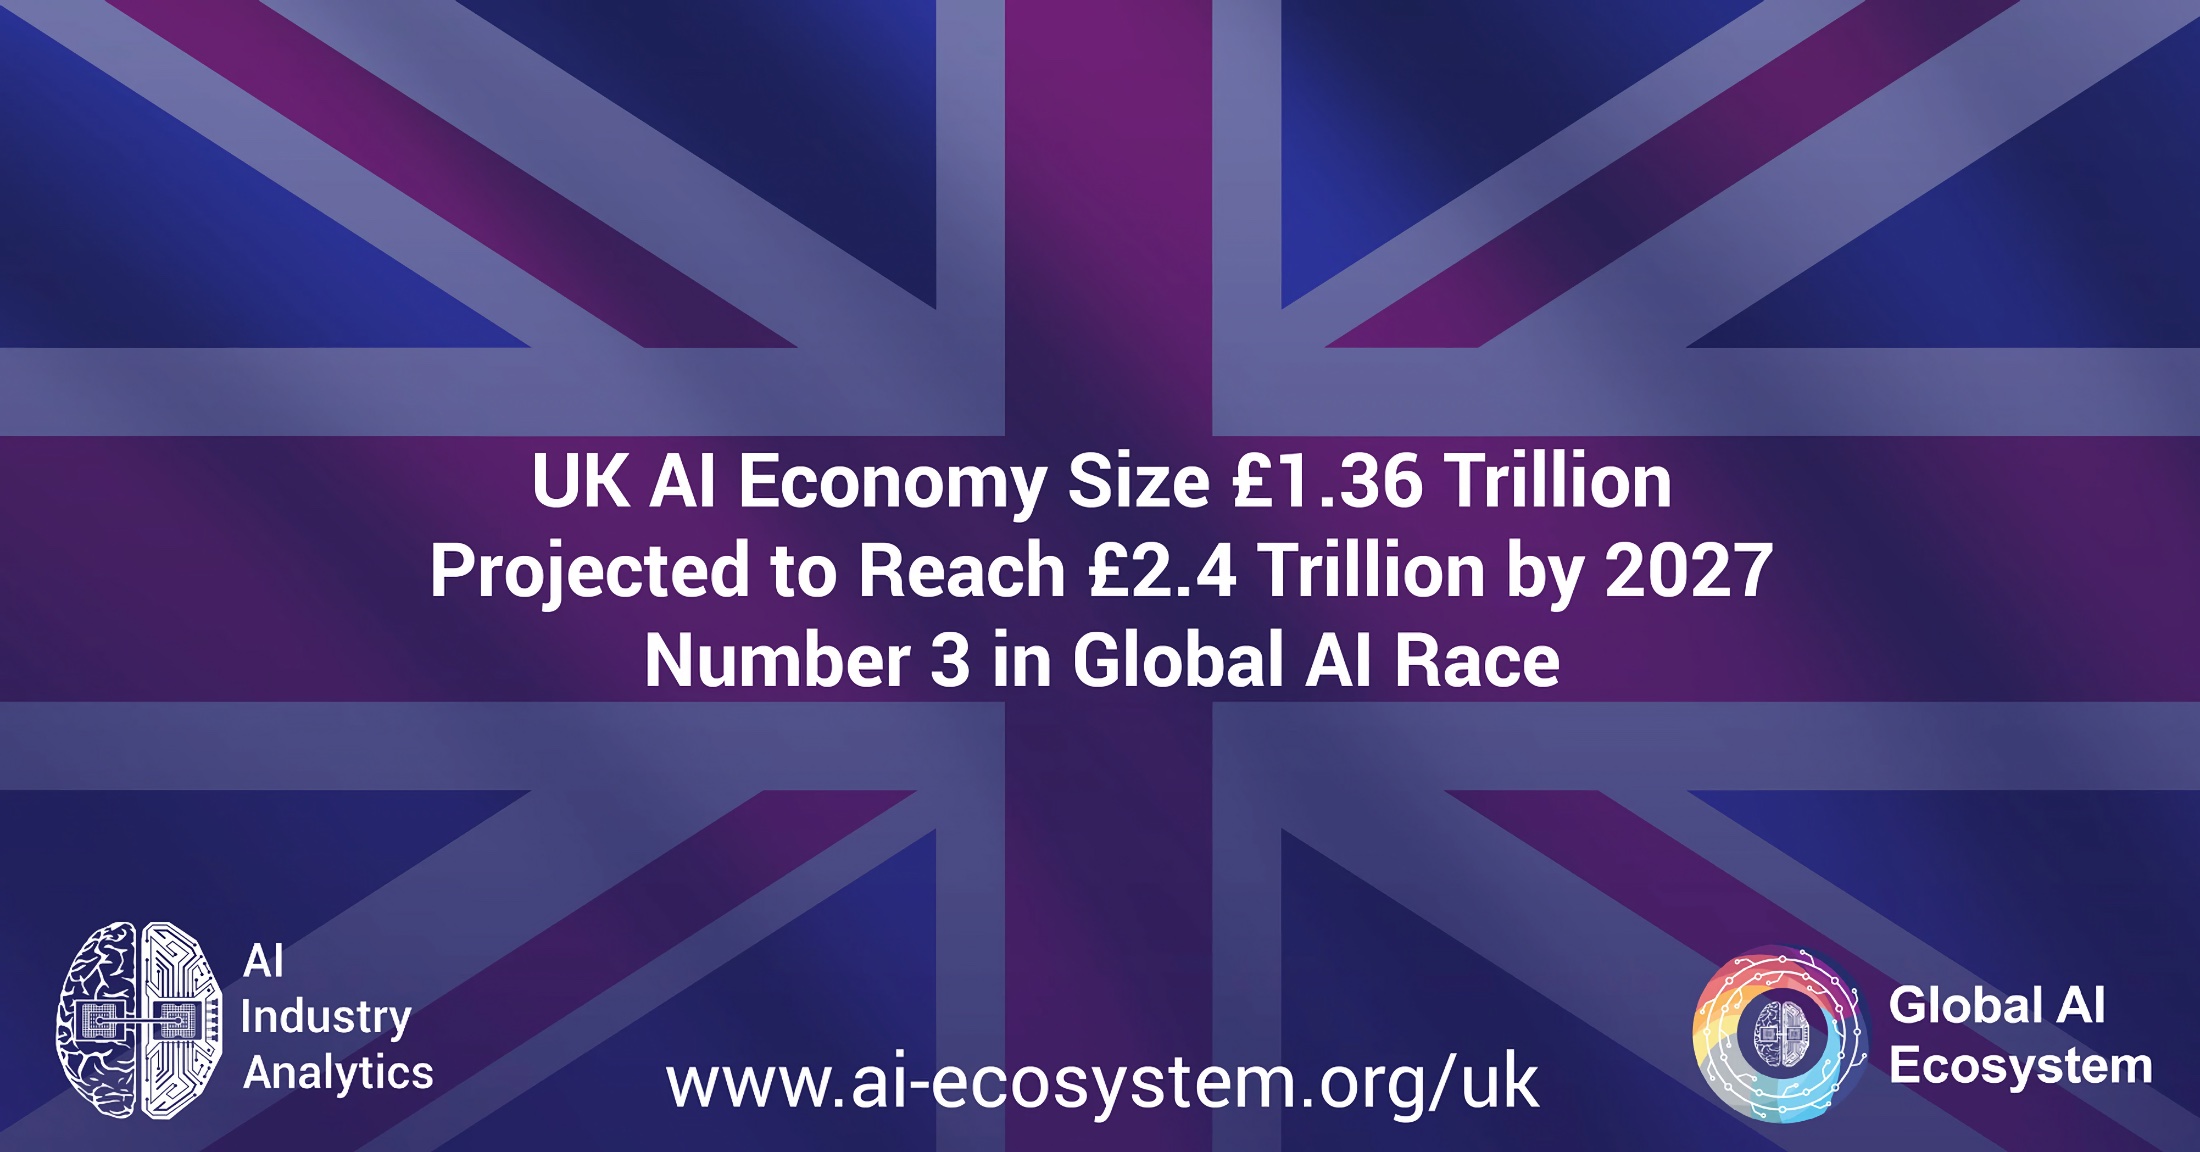 UK’s AI ecosystem to hit £2.4T by 2027, third in global race